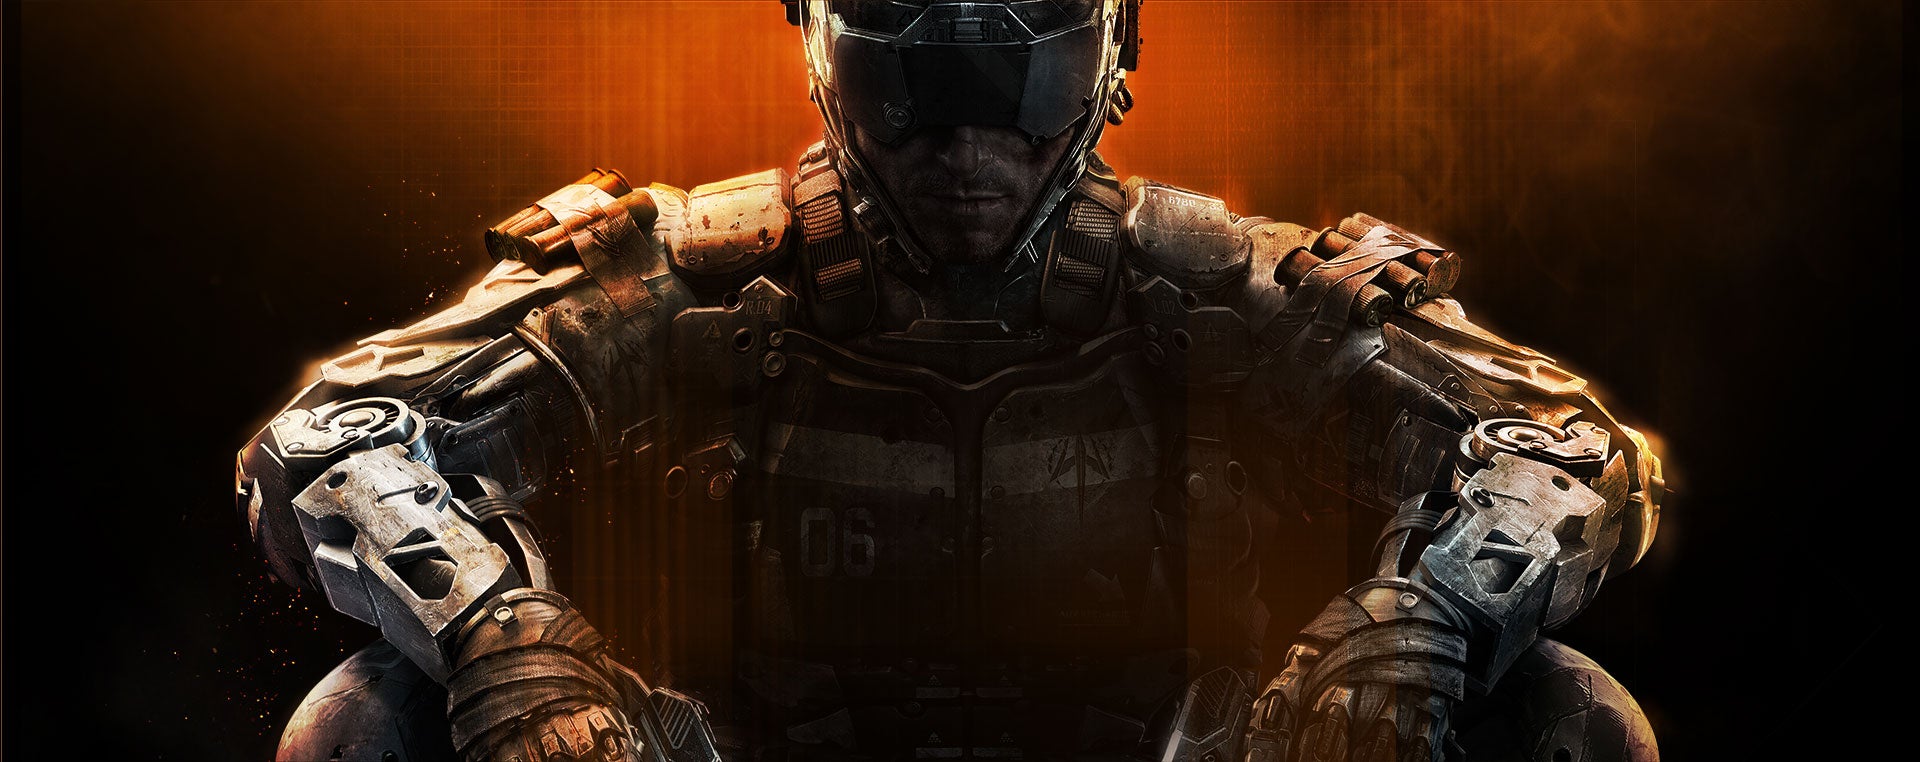 Image for Call of Duty: Black Ops 3 - Salvation arrives on PS4 September 6